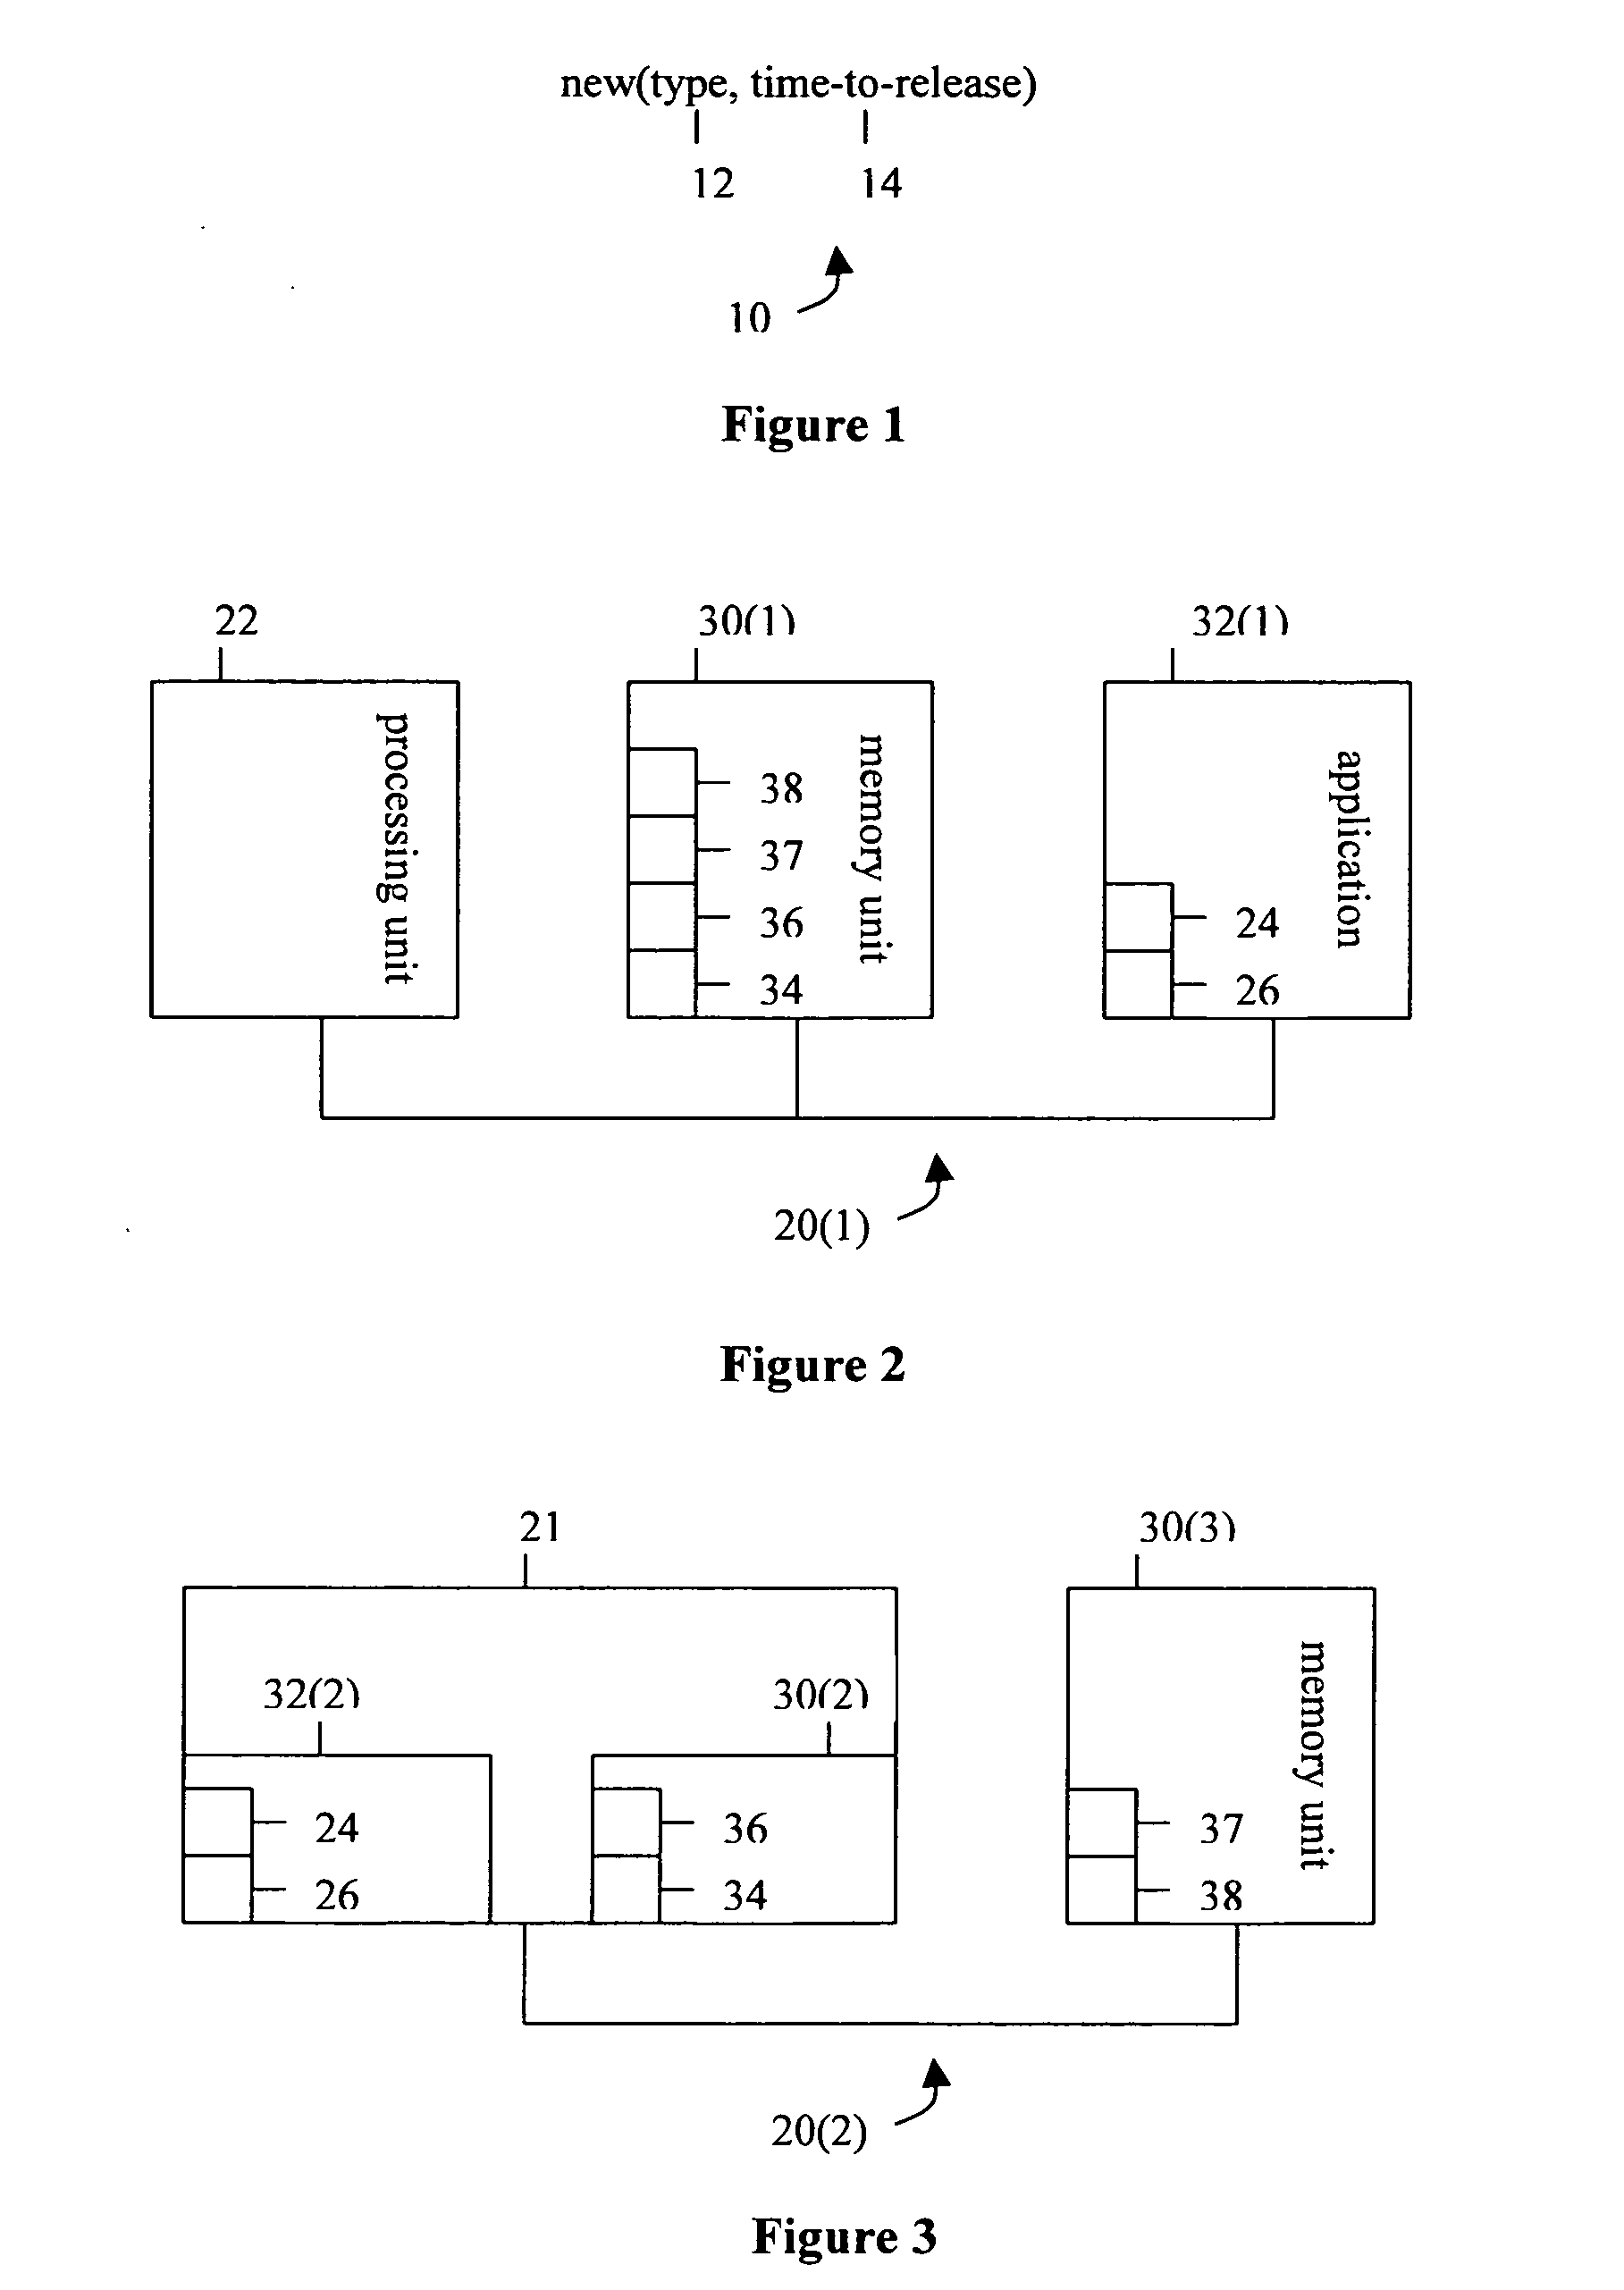 Memory management for a data processing system